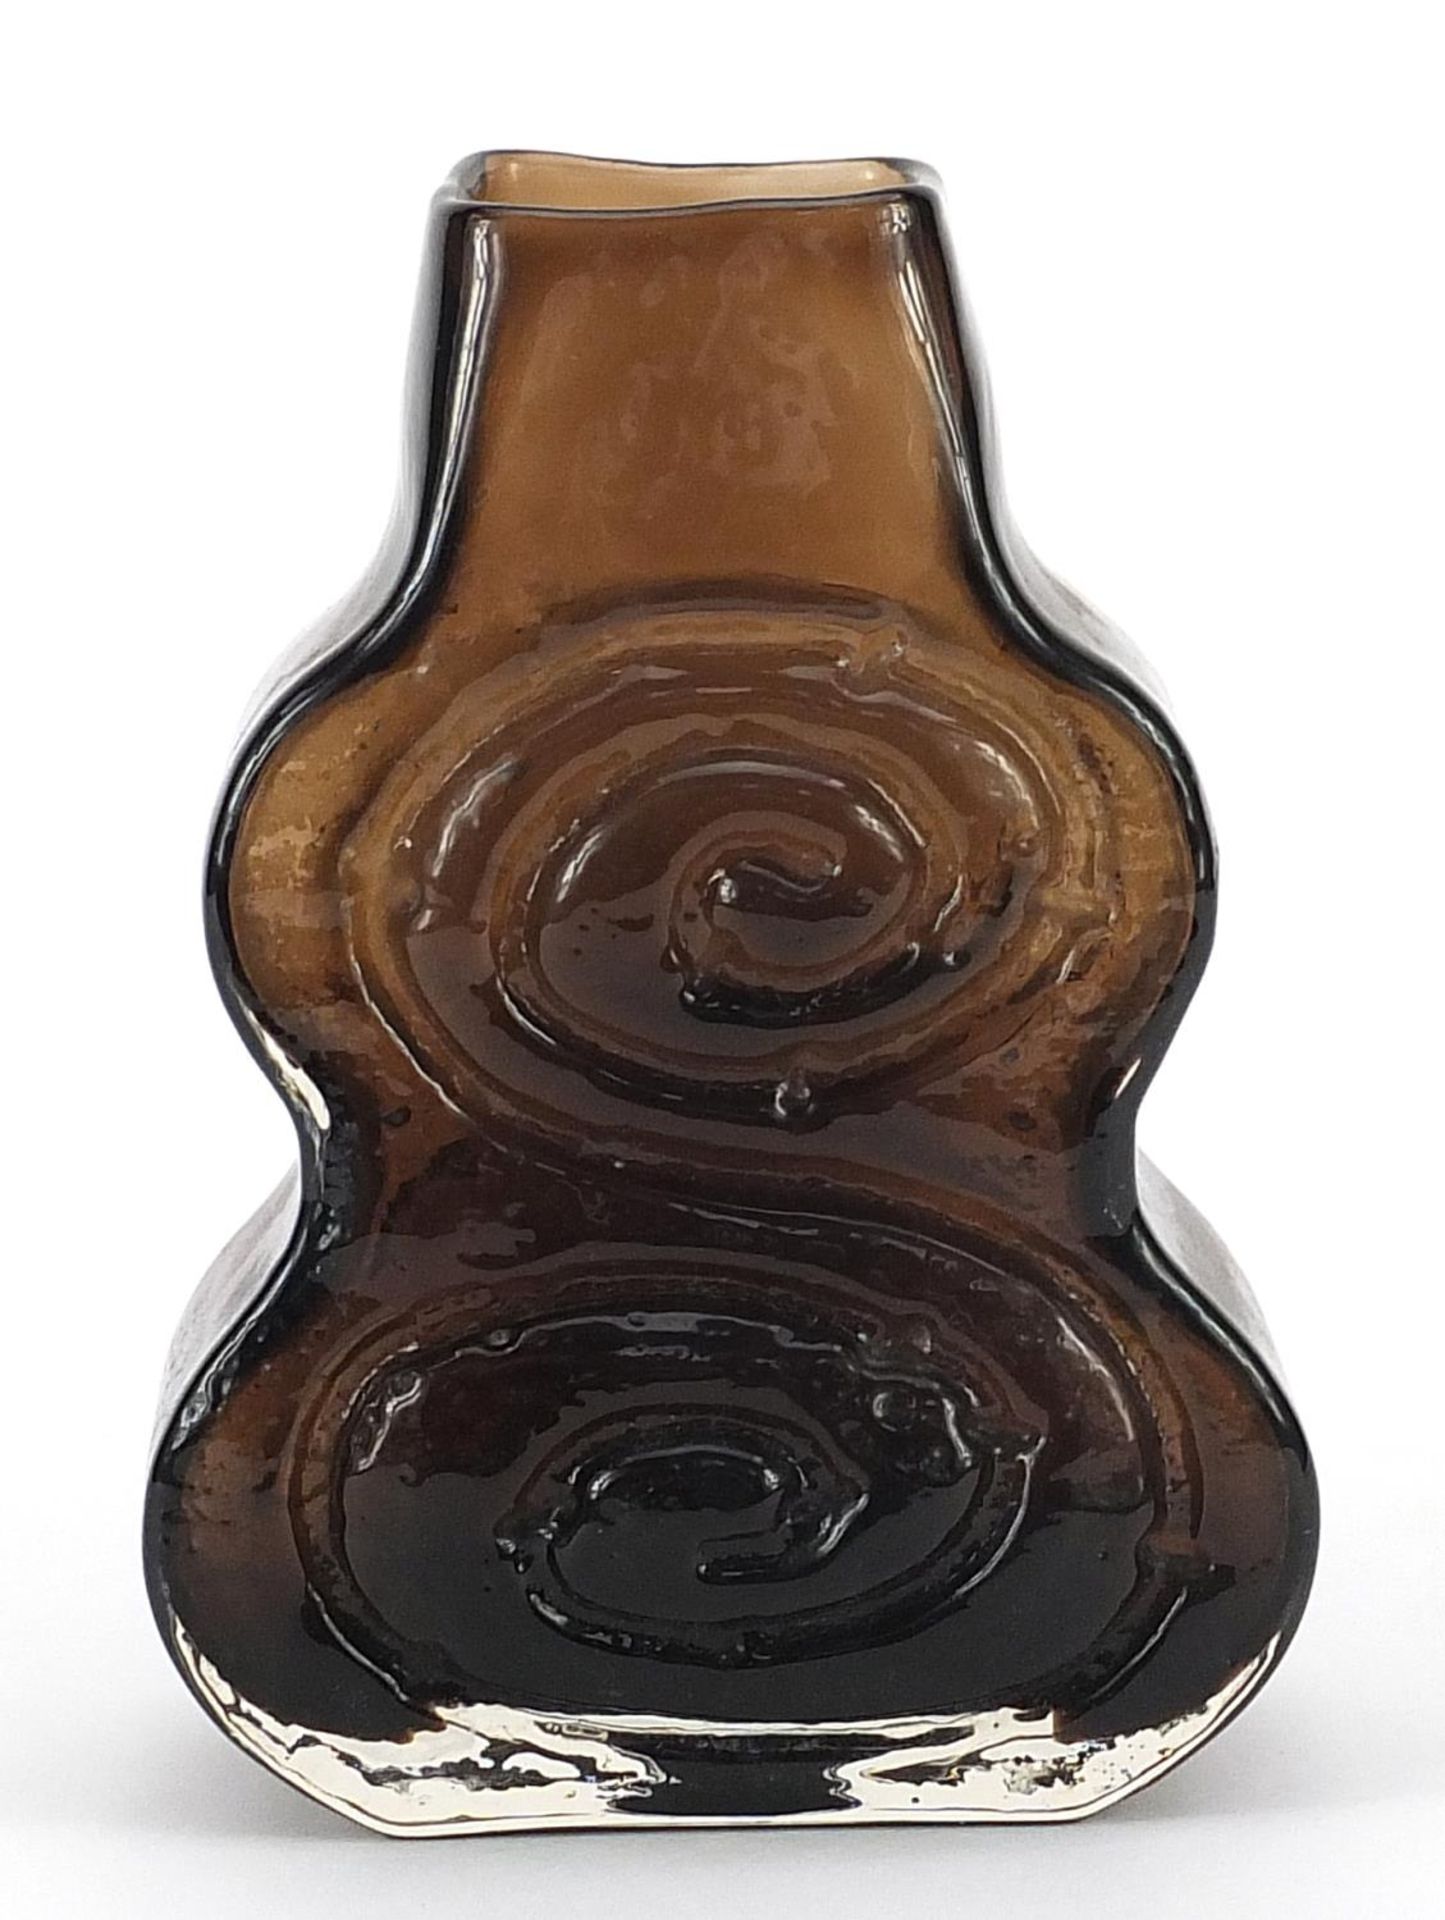 Geoffrey Baxter for Whitefriars, glass cello vase in cinnamon, 17.5cm high - Image 2 of 3